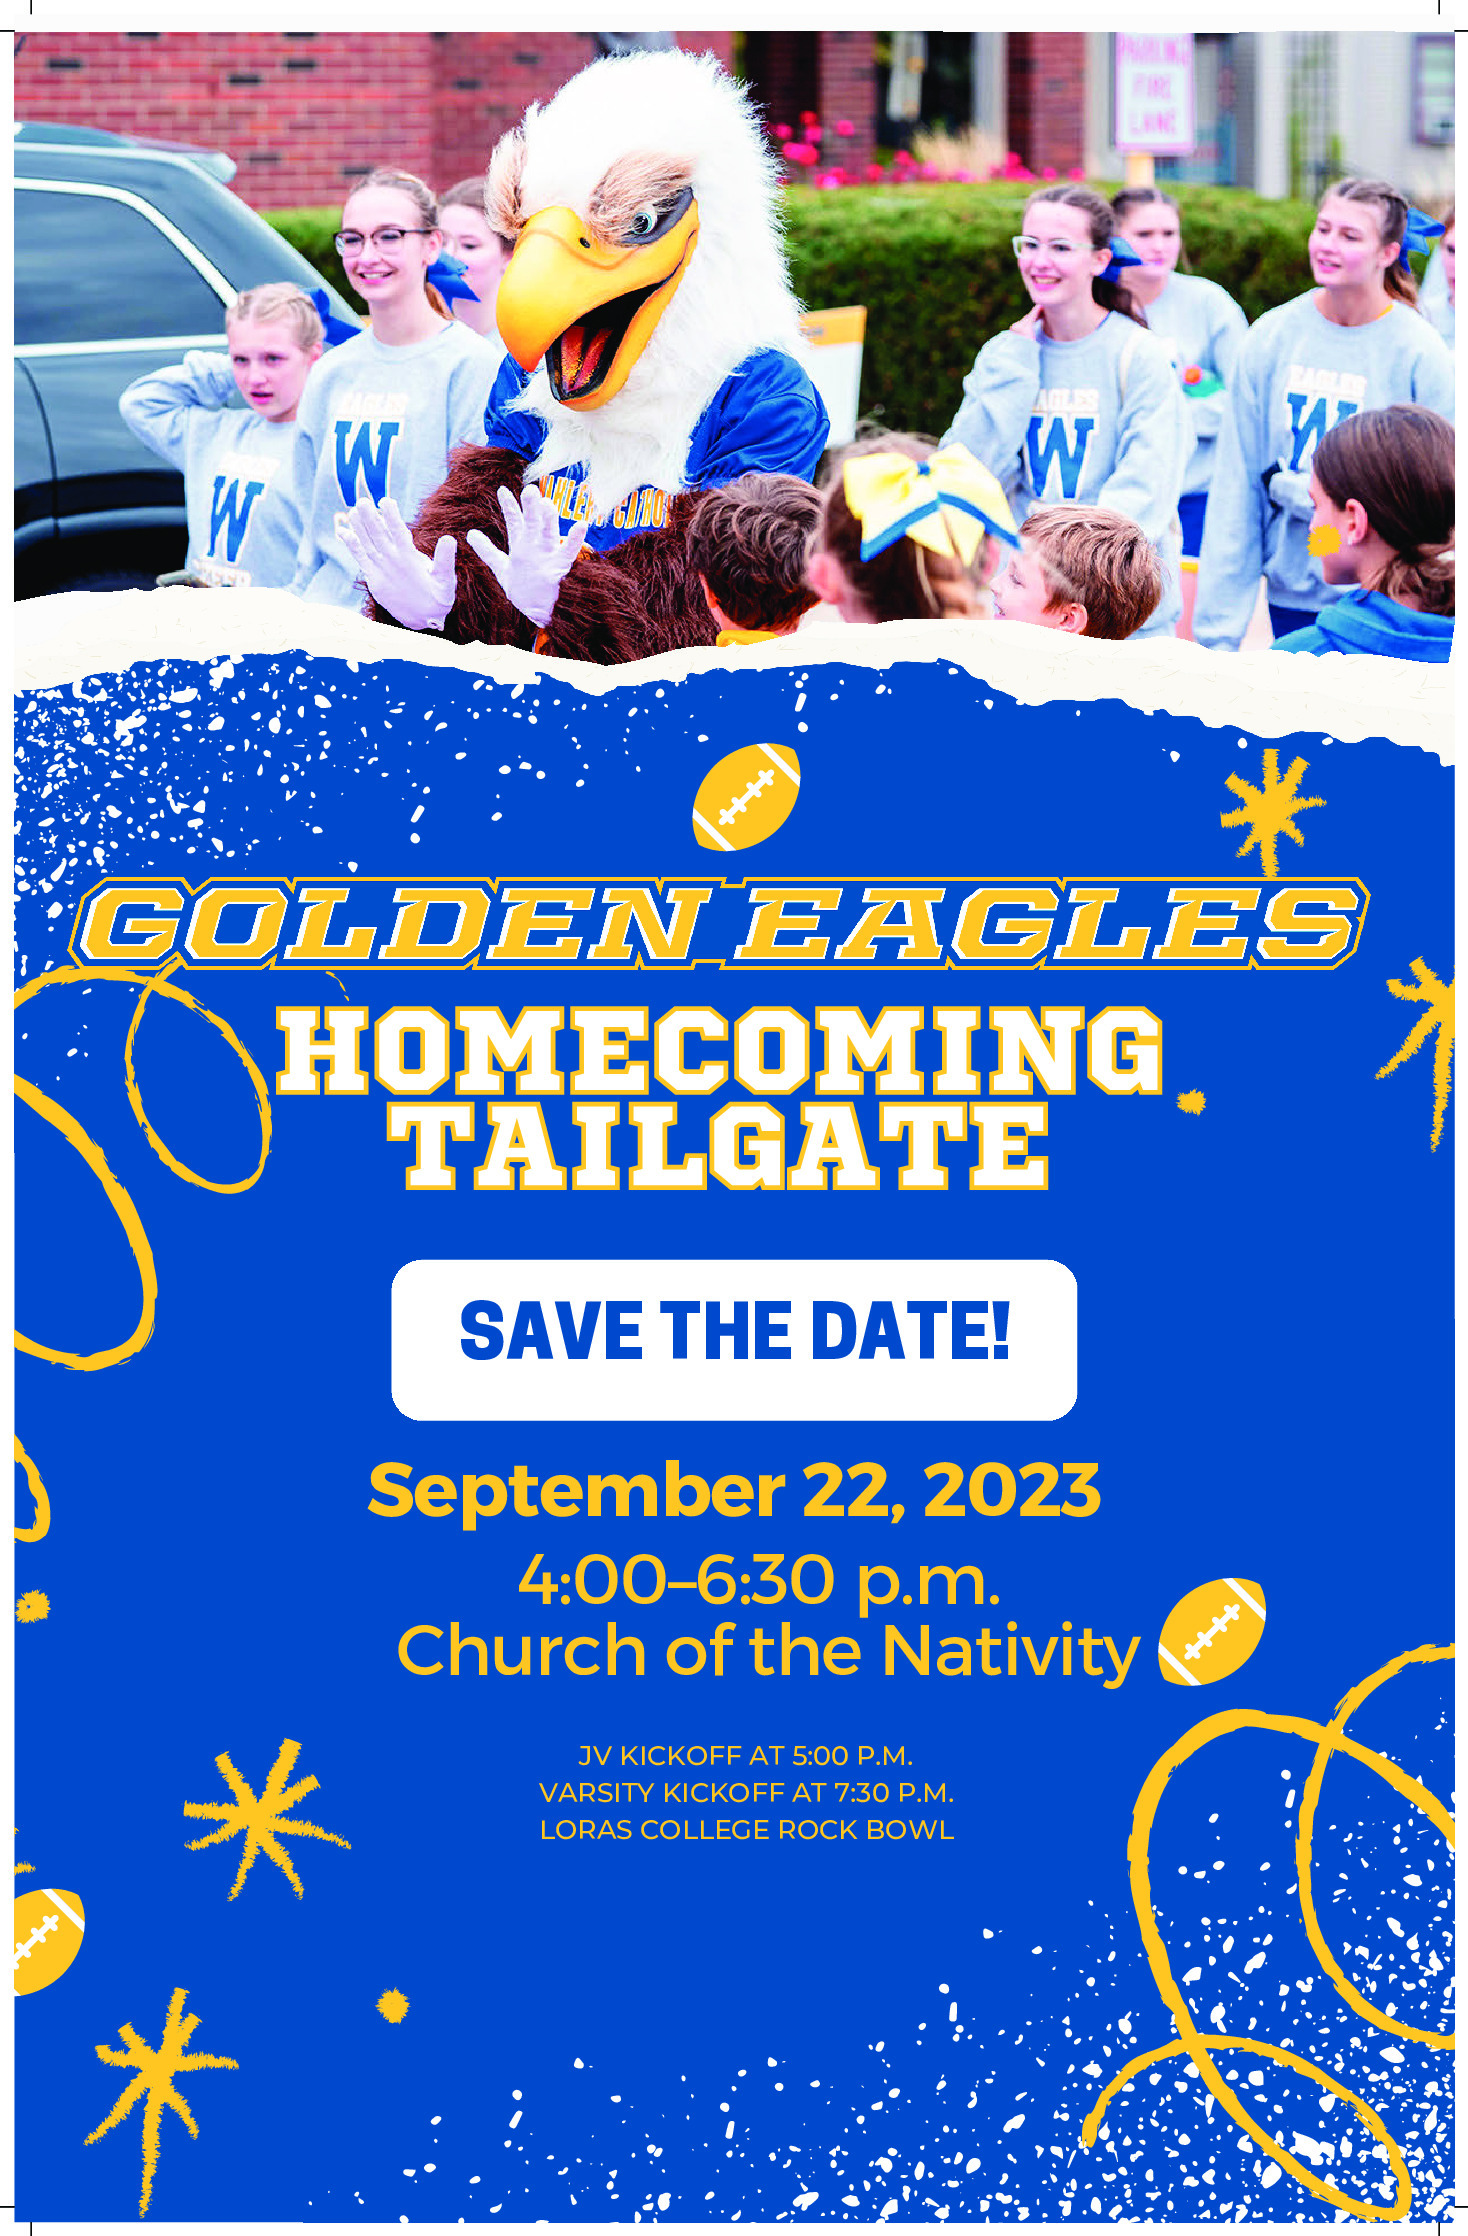 thumbnail of Homecoming Tailgate Save the Date Poster_11x17